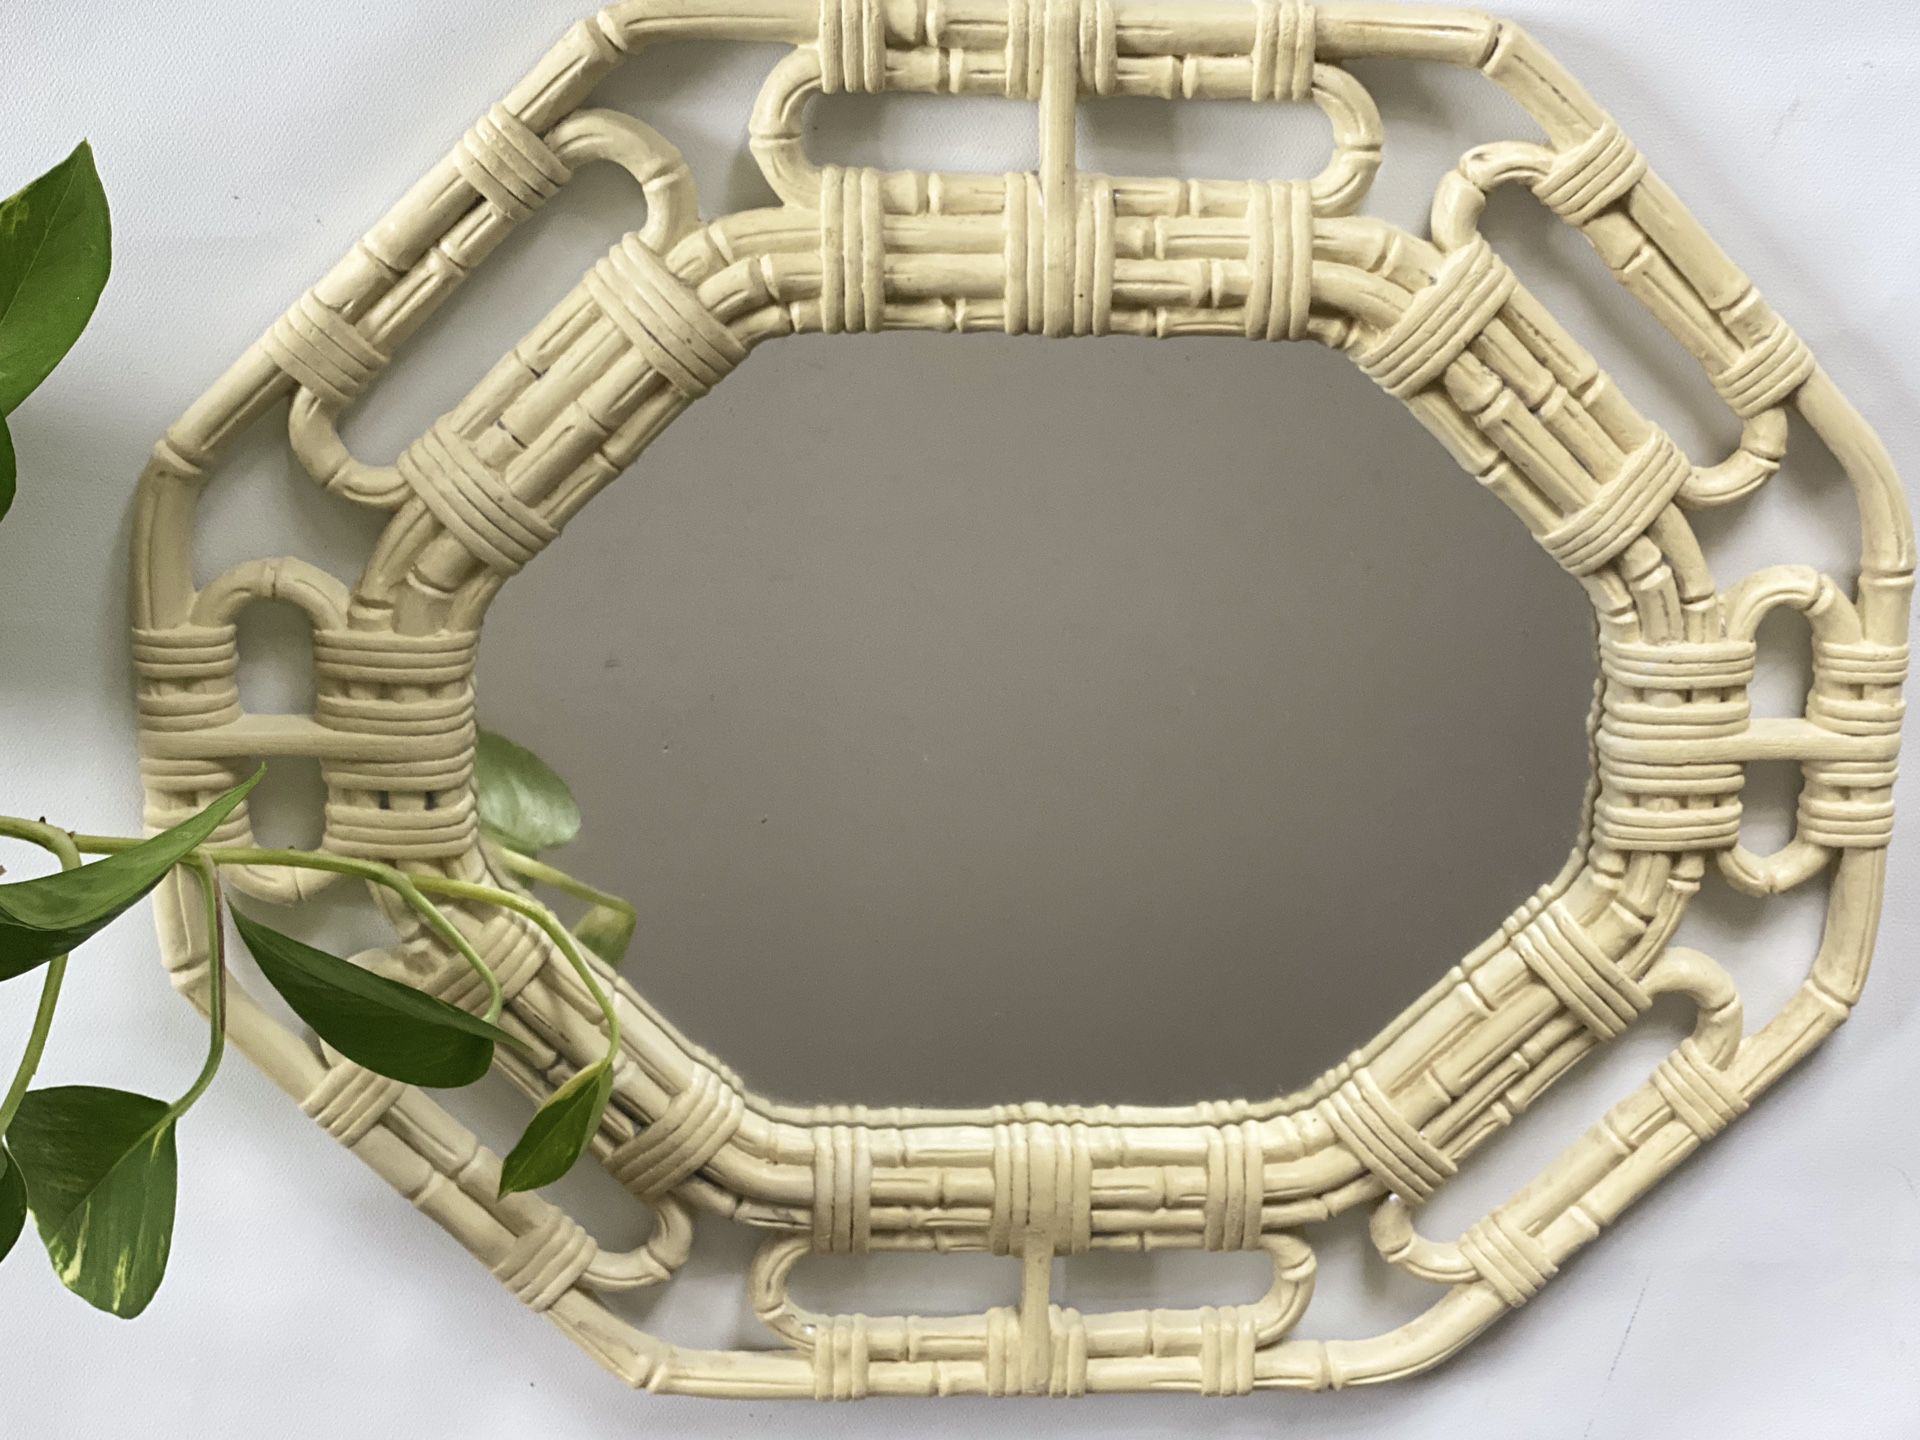 Vintage 70s Decorative Wall Mirror / mirror tray Plastic Faux Wicker Style Mirror Made In USA 17x14